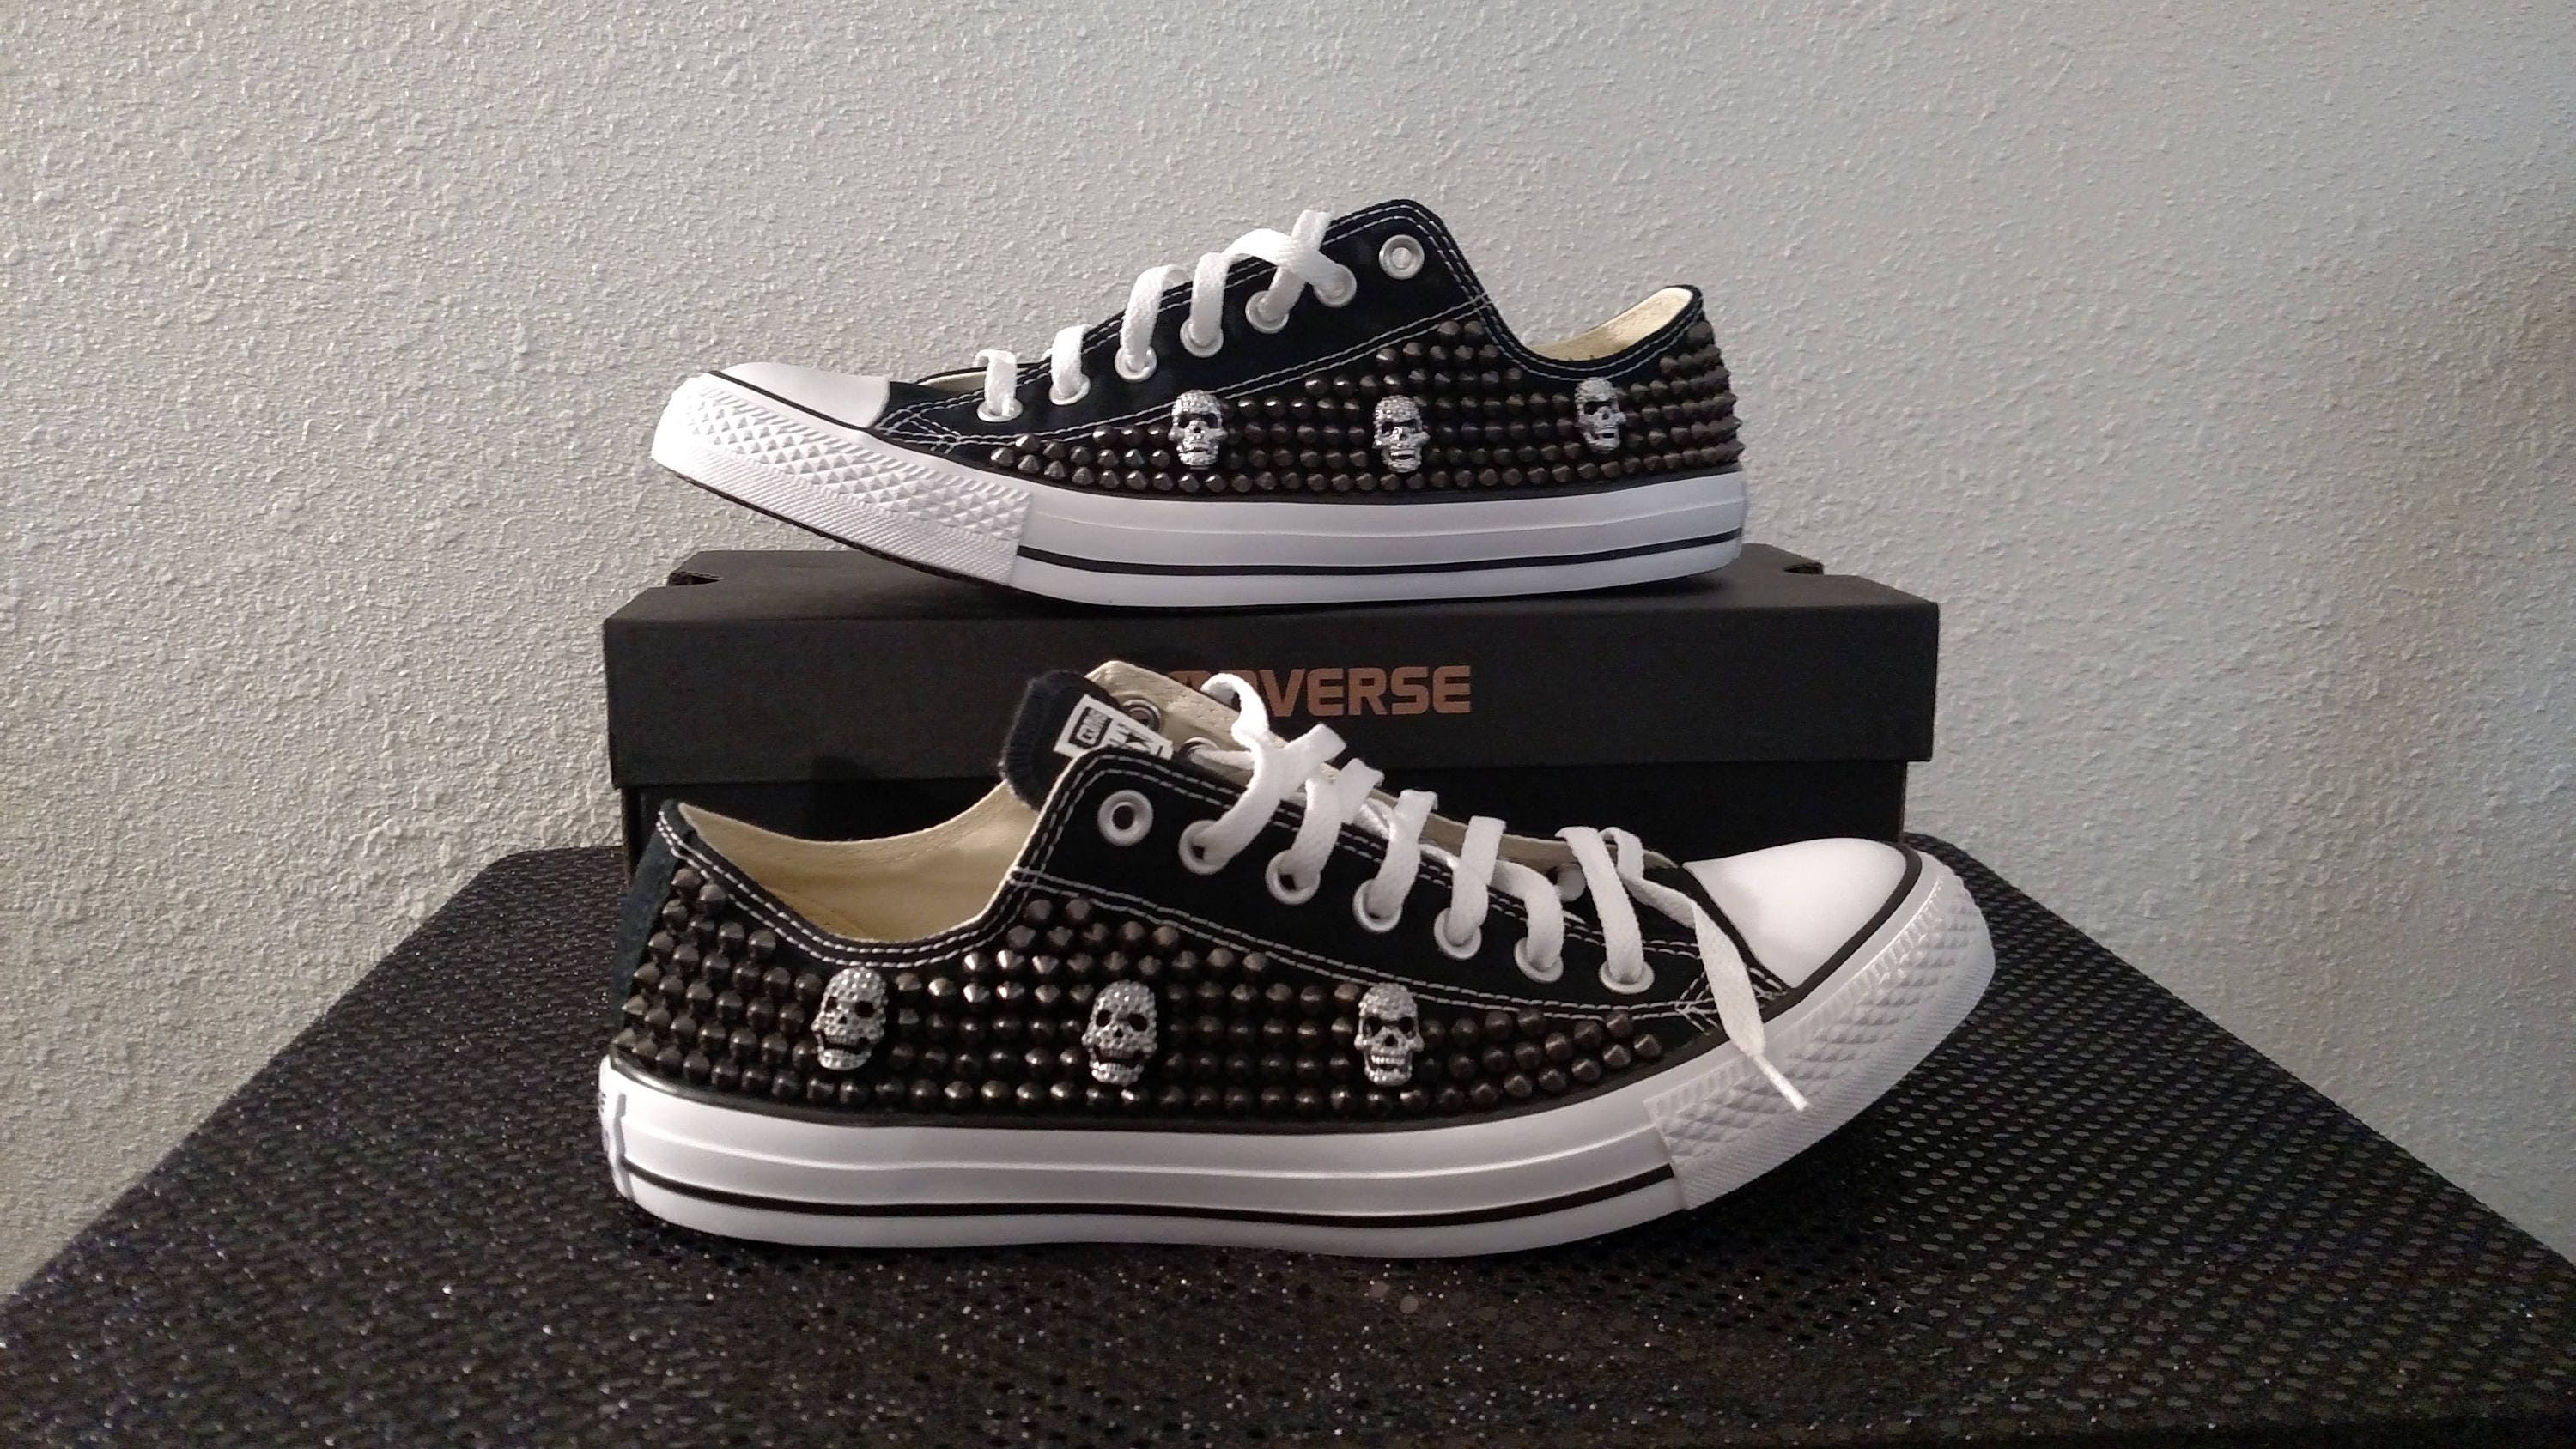 Studded Converse Shoes Skulls Brand New Converse Low Top - Etsy